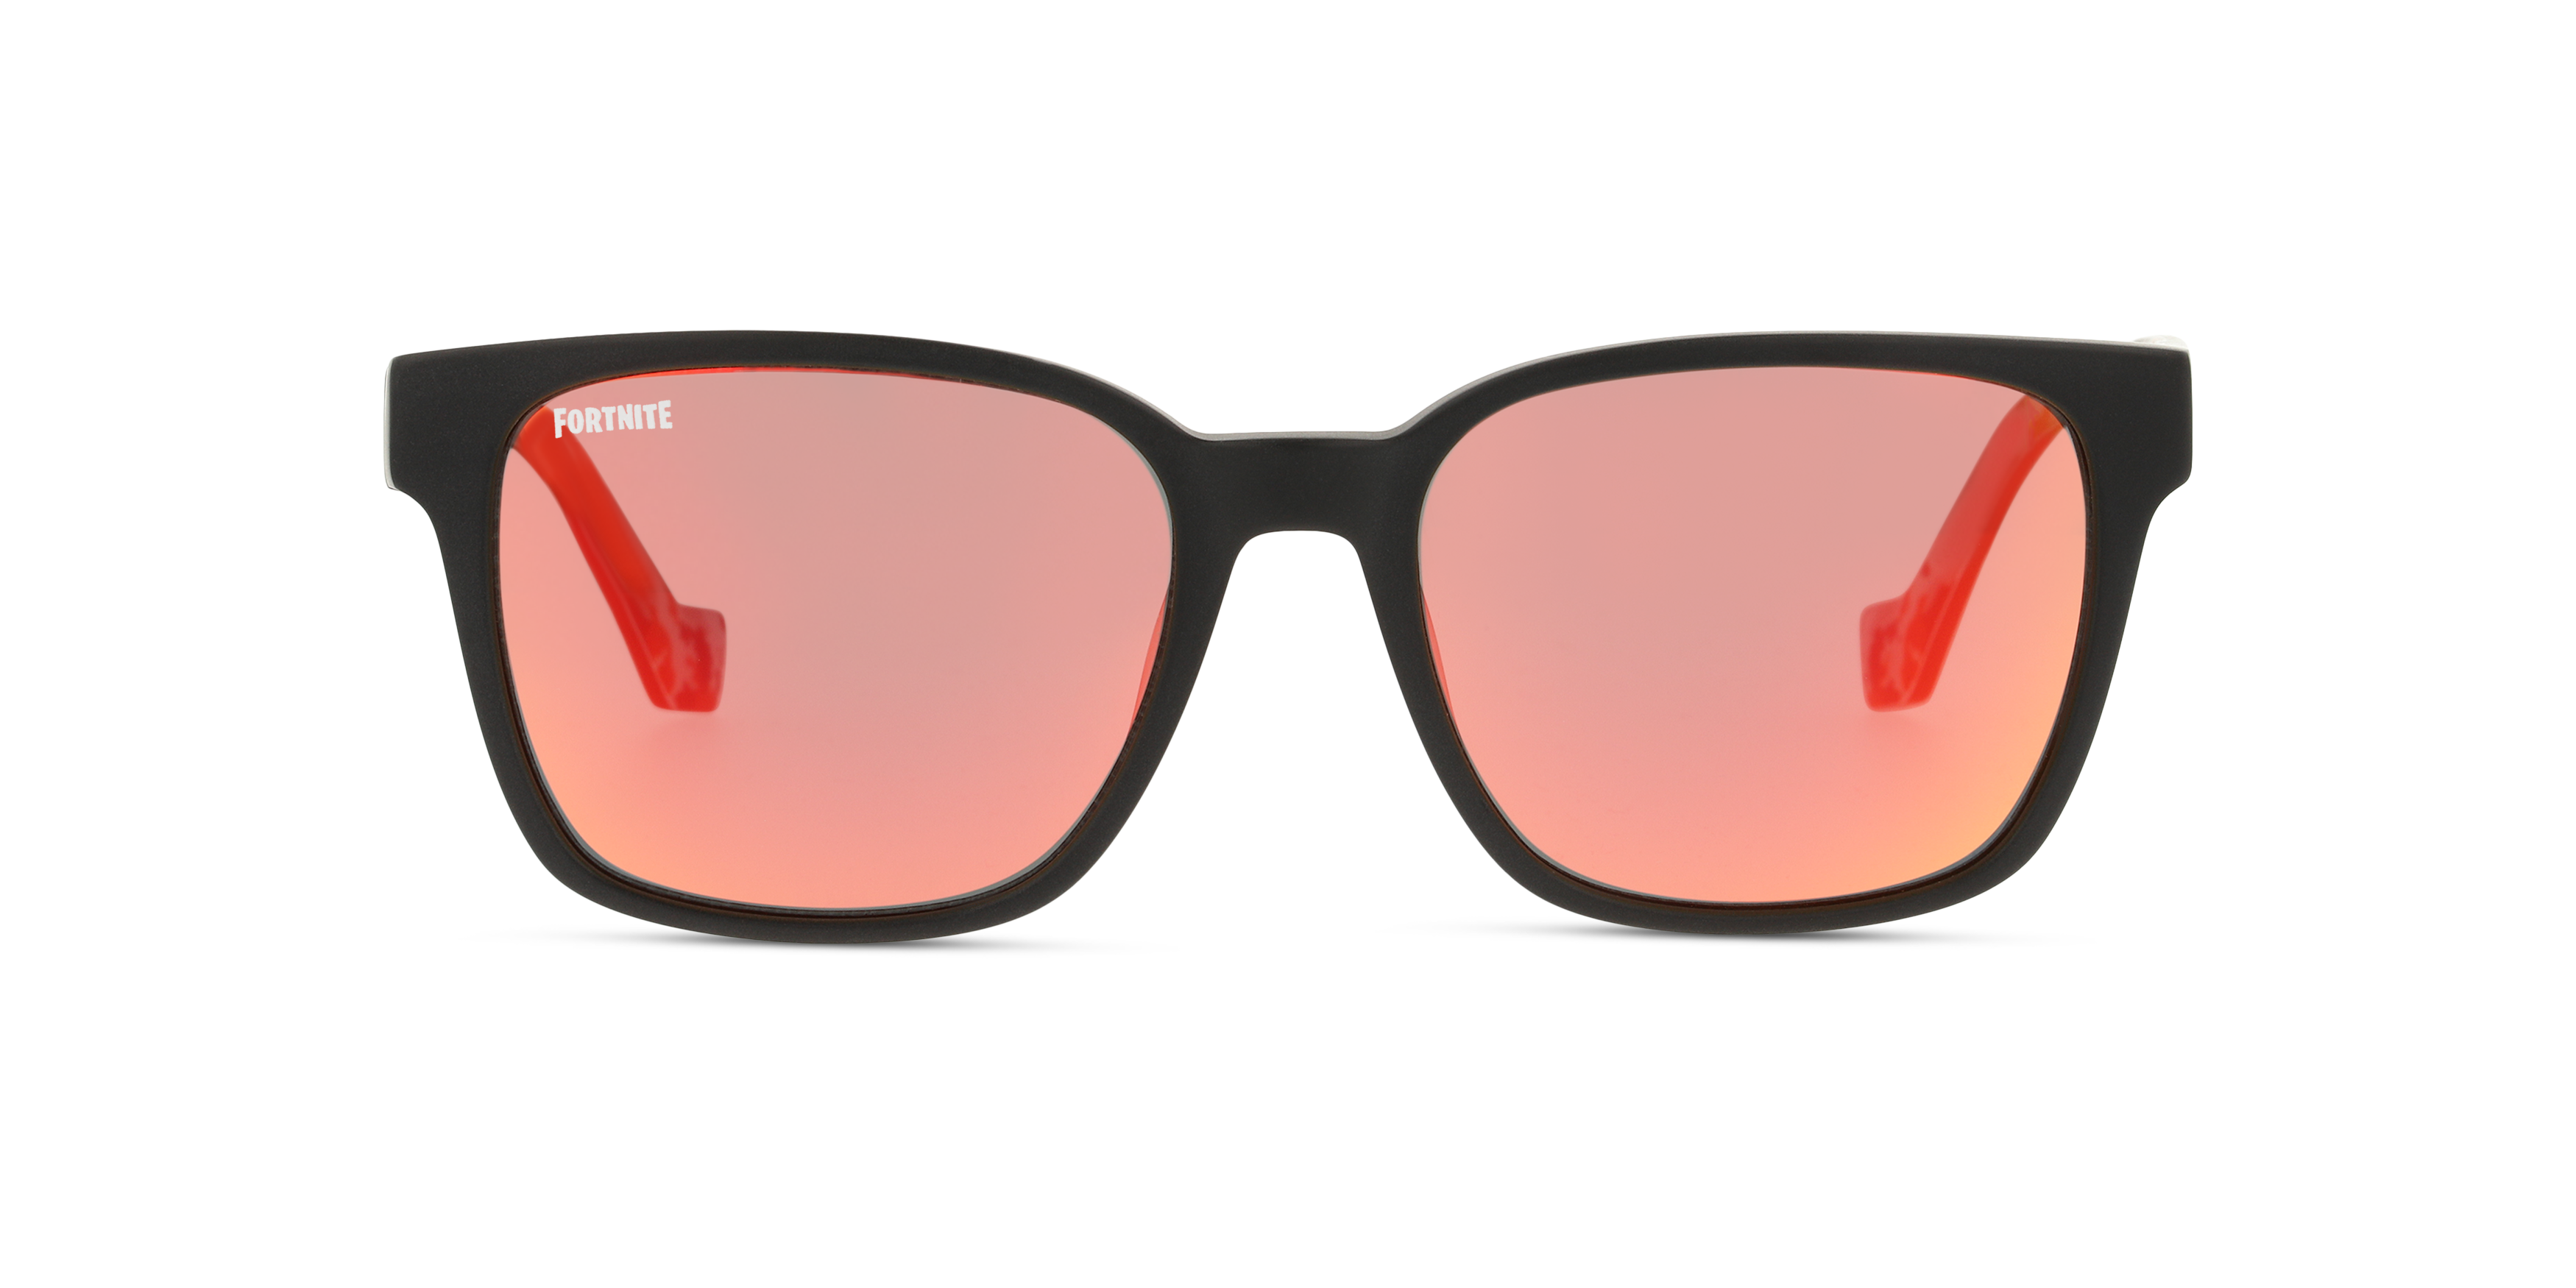 Front Fortnite with Unofficial UNSU0156 Sunglasses Grey / Black